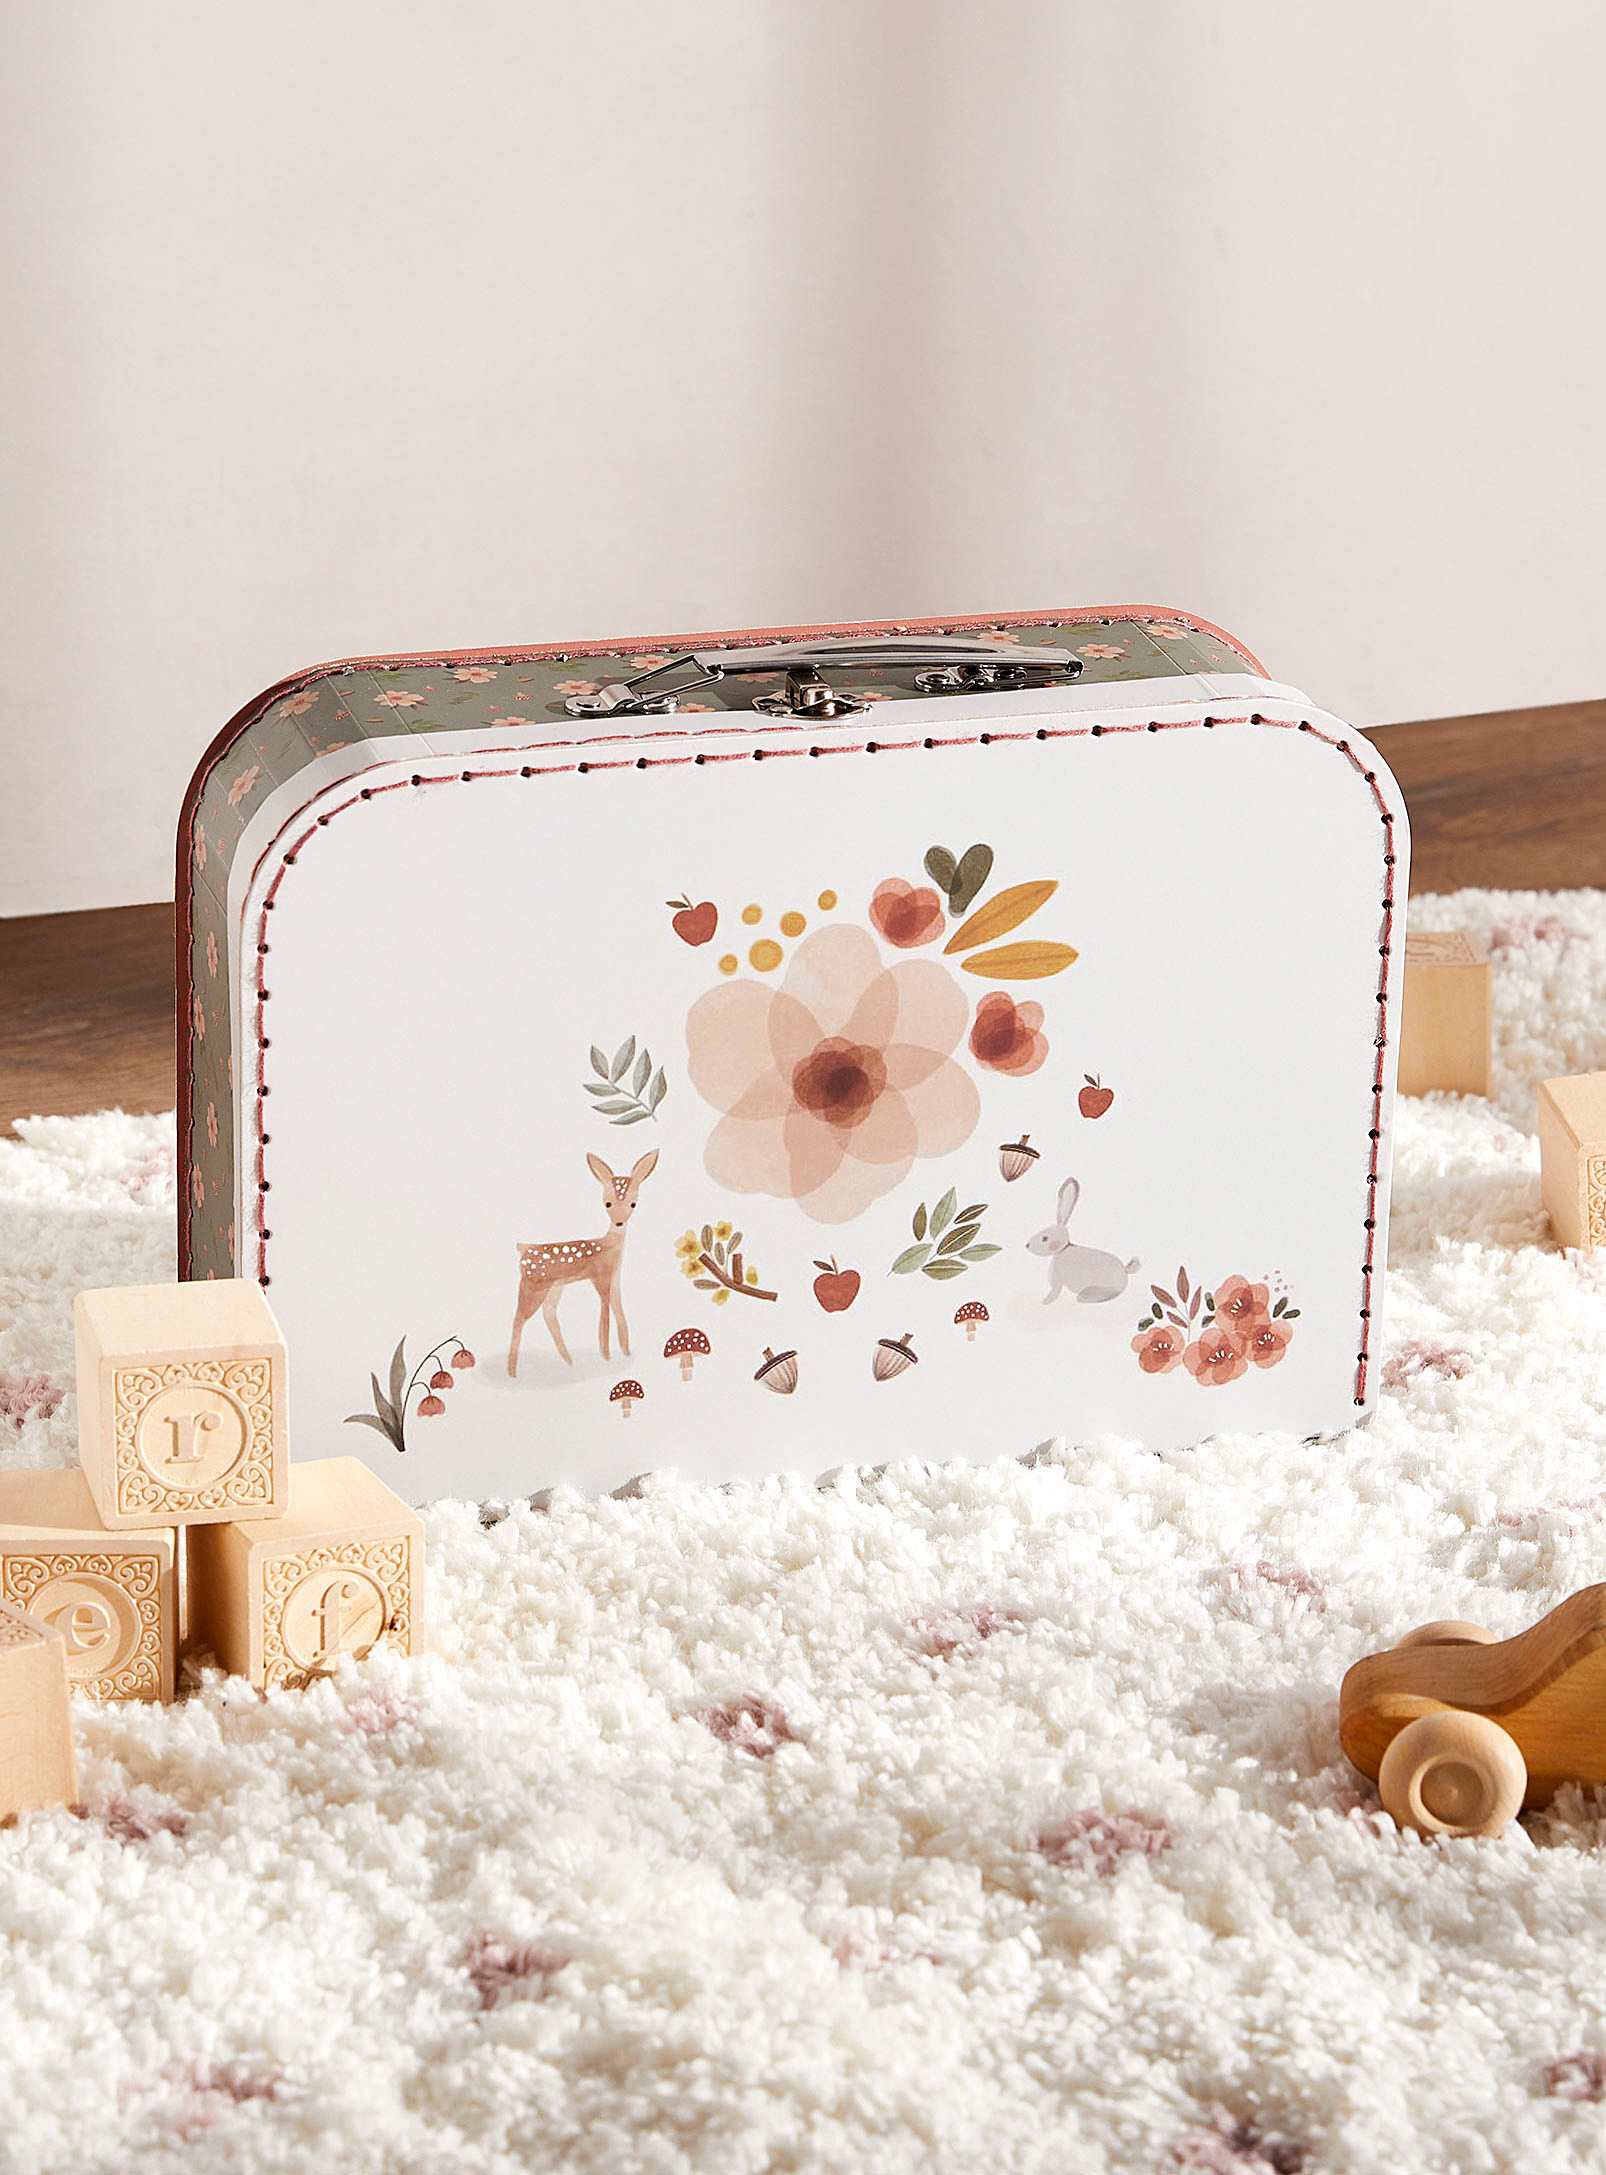 Simons Maison - Small enchanted forest suitcase